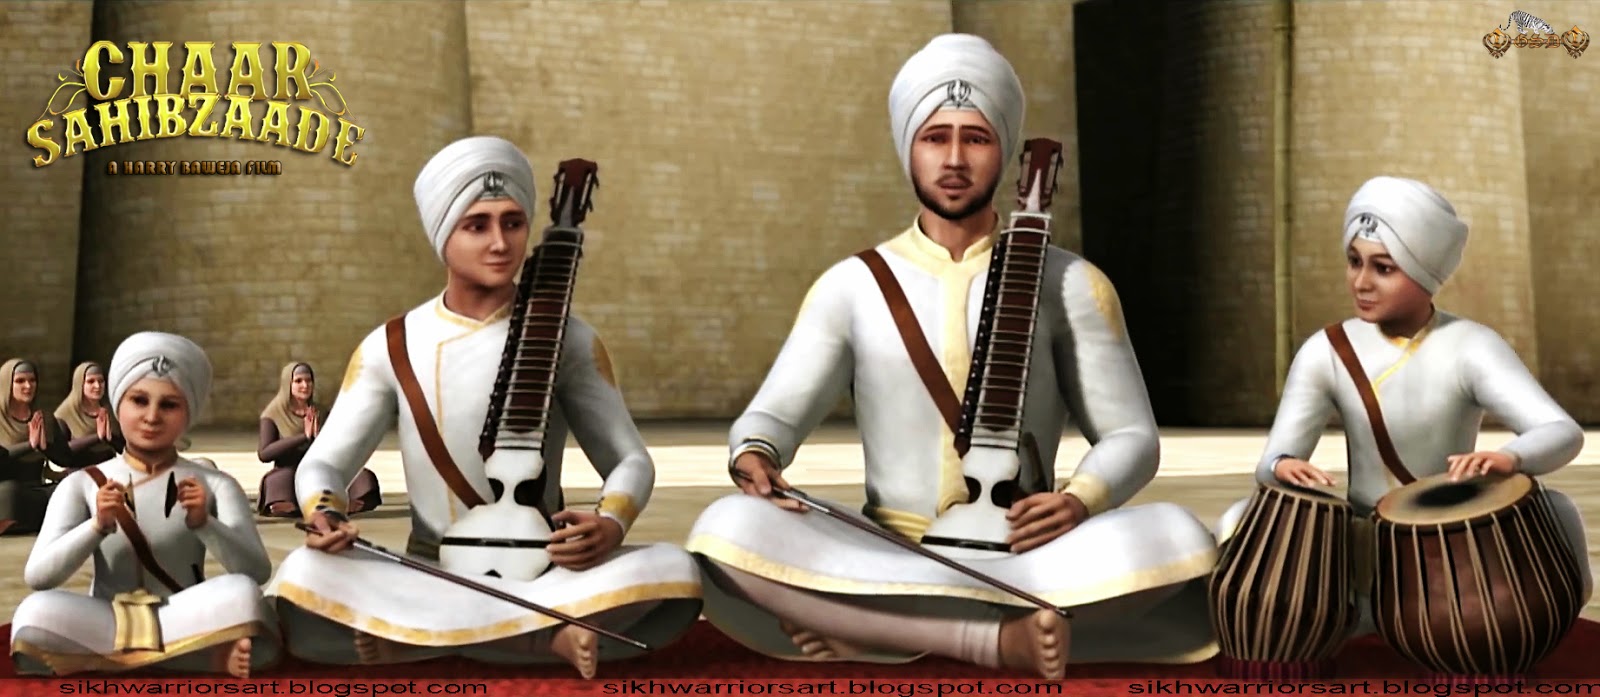 Free download Sikh Warriors Chaar Sahibzaade 3D HD Movie Wallpapers  [1600x697] for your Desktop, Mobile & Tablet | Explore 47+ Sikh Warrior  Wallpaper | Sikh God Wallpaper, Warrior Cats Backgrounds, Sikh God  Wallpapers